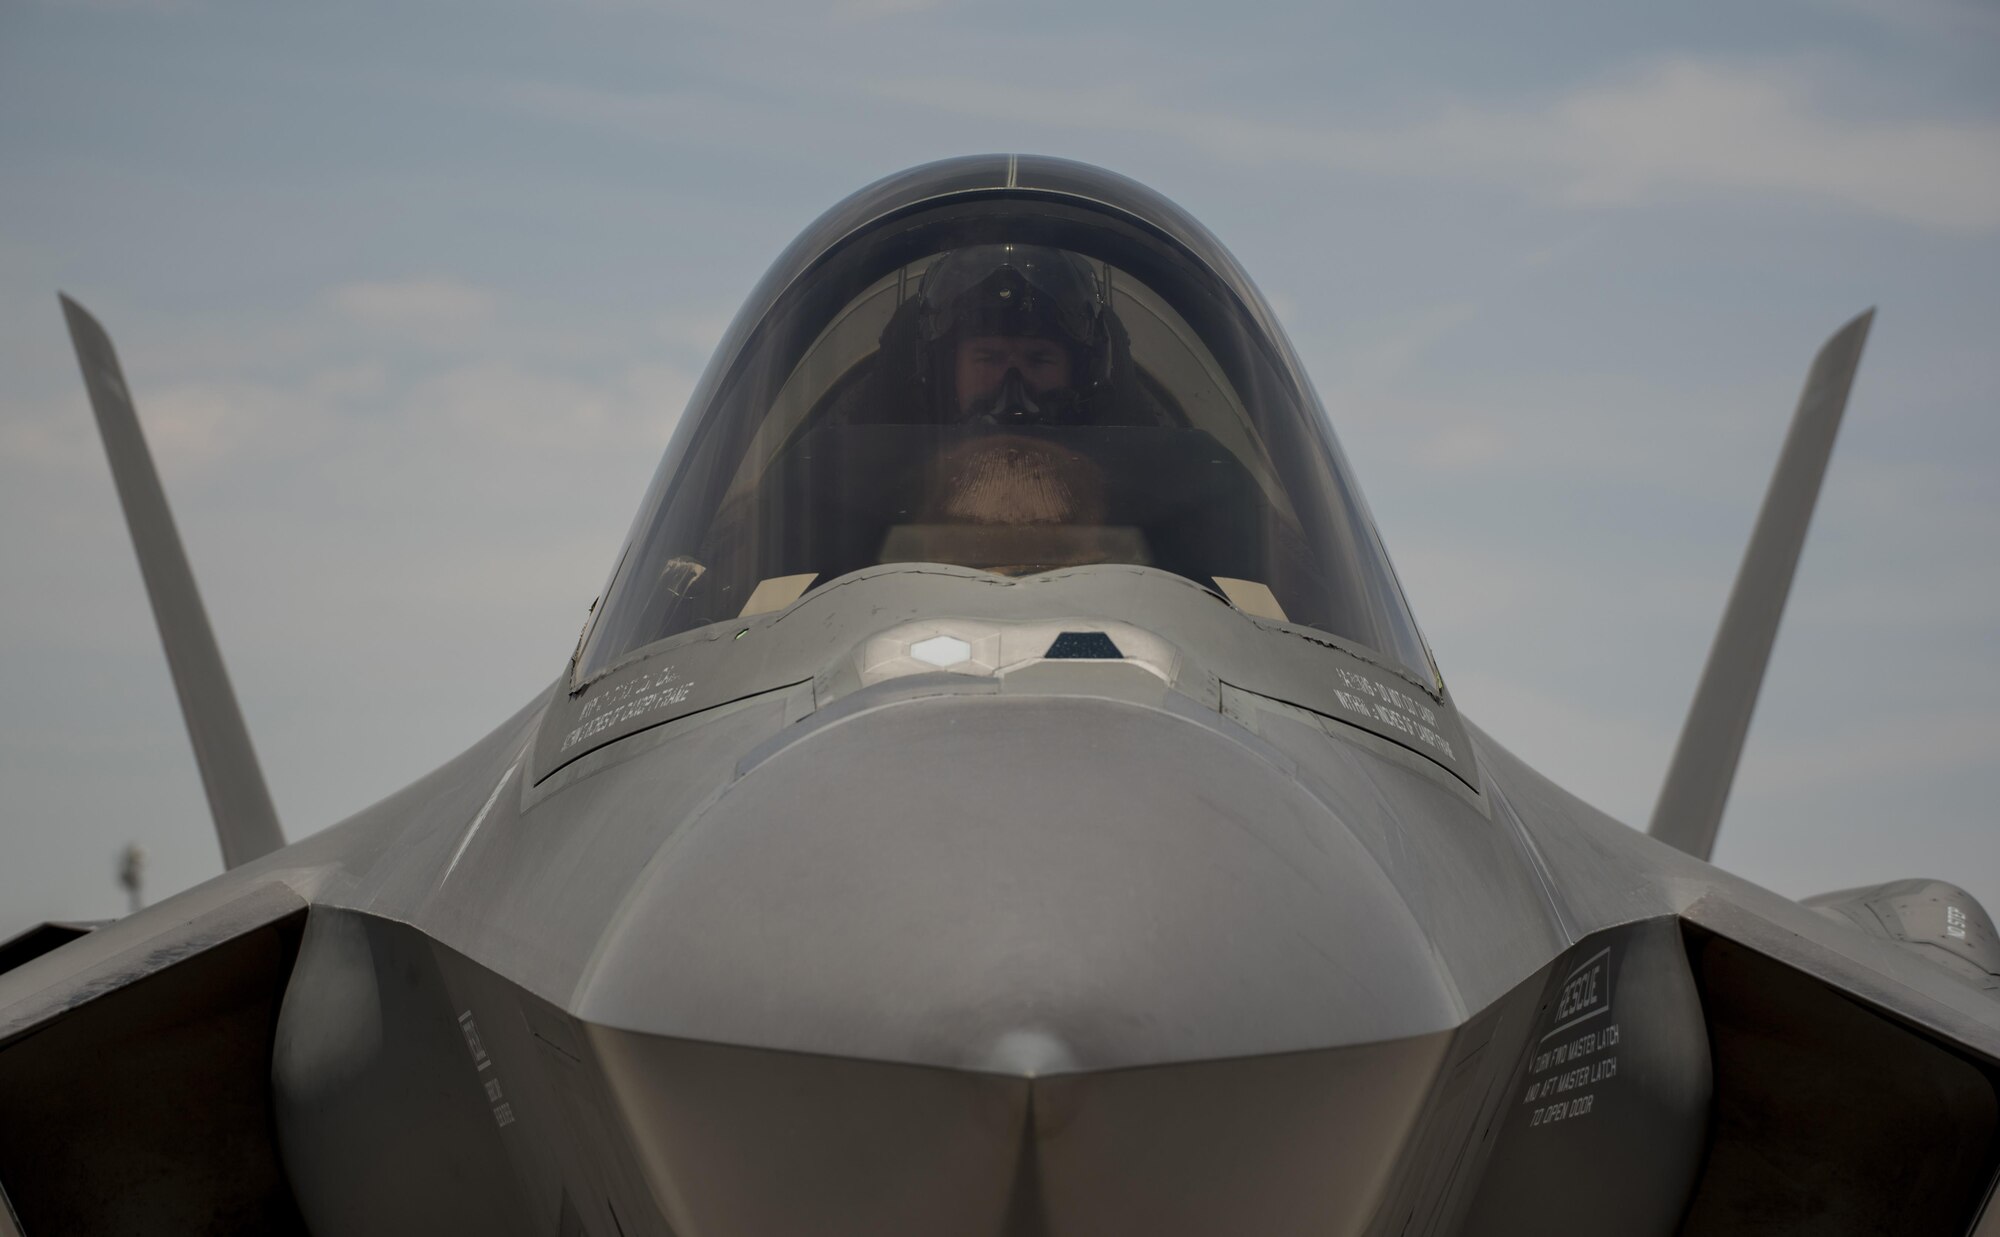 An F-35A Lightning II pilot awaits permission to taxi July 18, 2017, at Nellis Air Force Base, Nev. The 33rd Fighter Wing and Marine Attack Squadron 221 from Yuma, Ariz., participated in the first combat exercise with Air Force F-35As and Marine Corps F-35Bs operating simultaneously during Red Flag 17-3. The large scale exercise, which was developed to provide pilots with critical experience in combat situations, enabled F-35 pilots to plan and train using the same tactics, techniques and procedures. (U.S. Air Force photo by Staff Sgt. Peter Thompson)